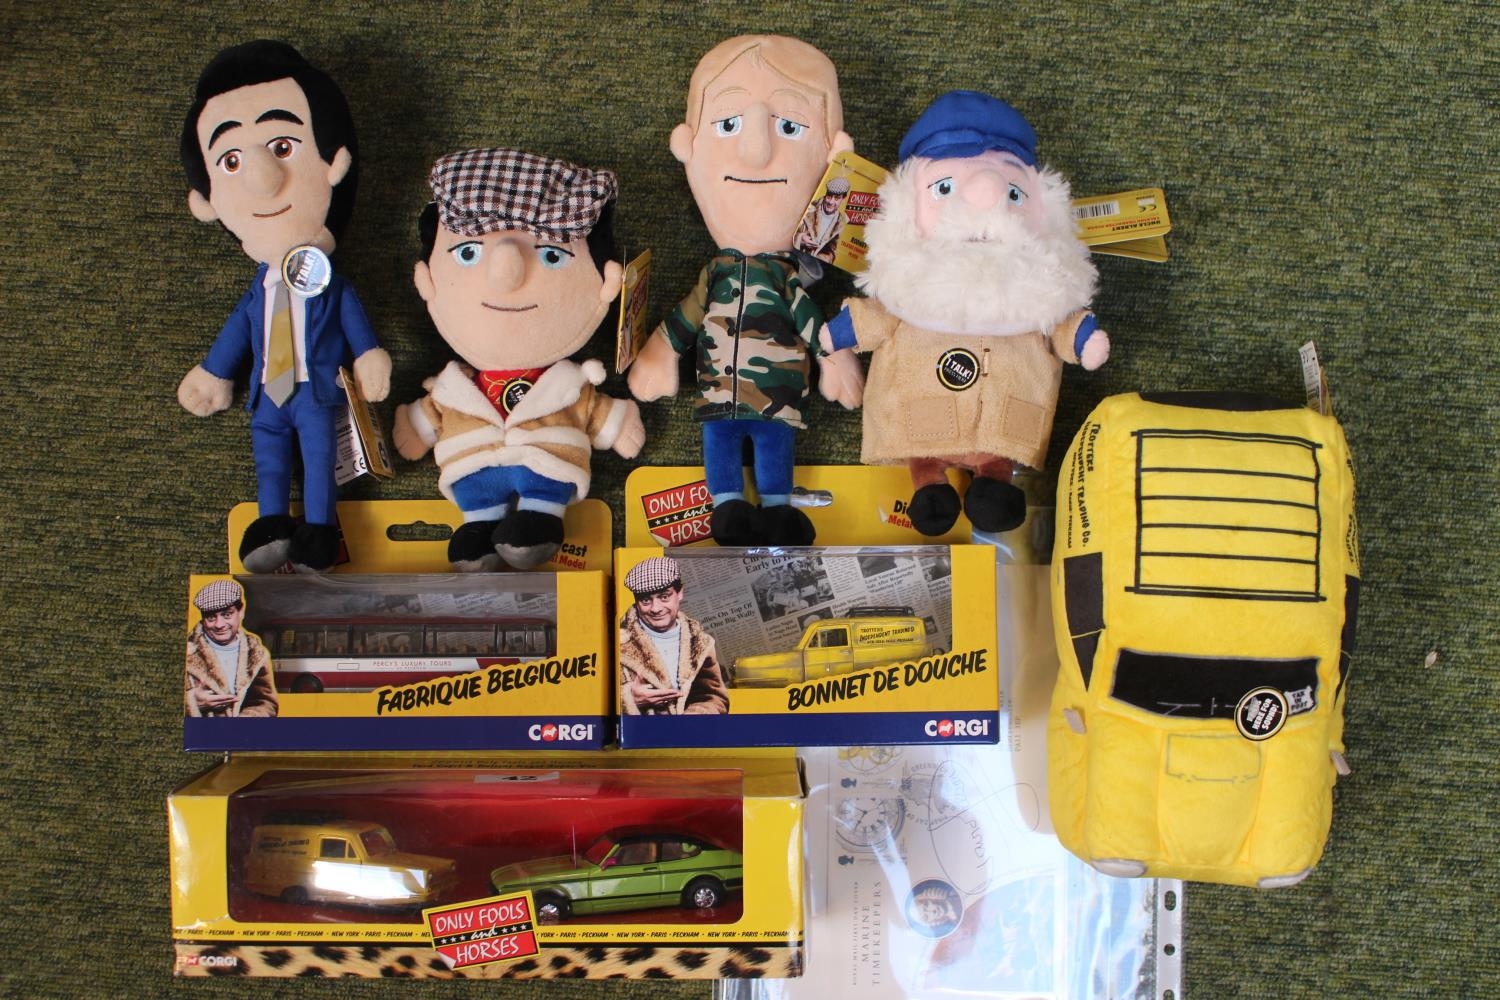 Only Fools & Horses, Talking Character Plush Toy - Del Boy, Rodney, Trigger and Rodney. Plush